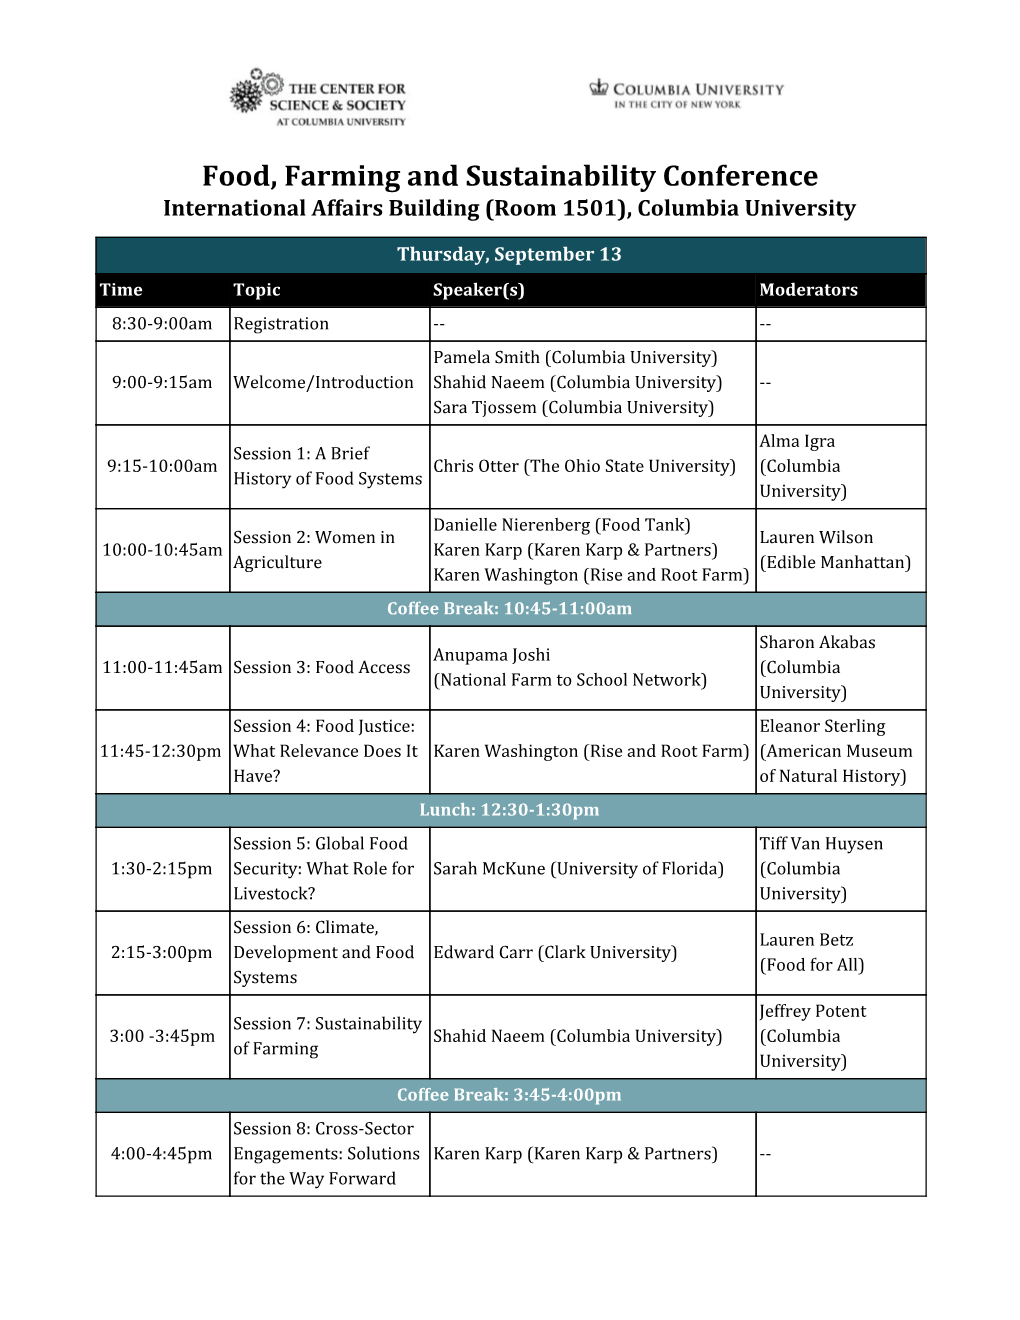 Food, Farming and Sustainability Conference International Affairs Building (Room 1501), Columbia University